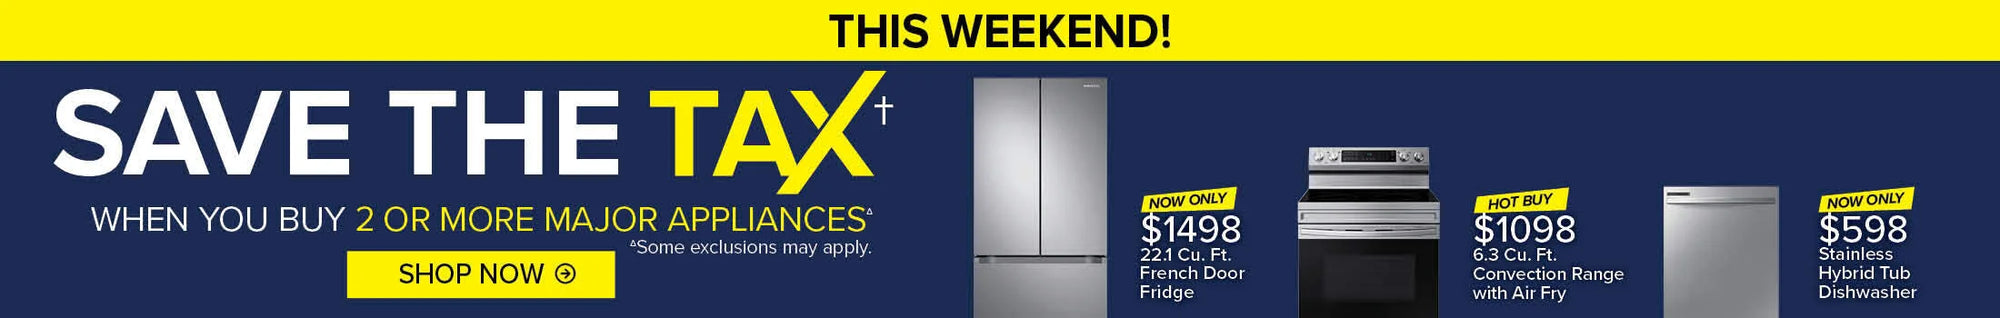 Save the tax when you buy 2 or more major appliances. Some exclusions apply.